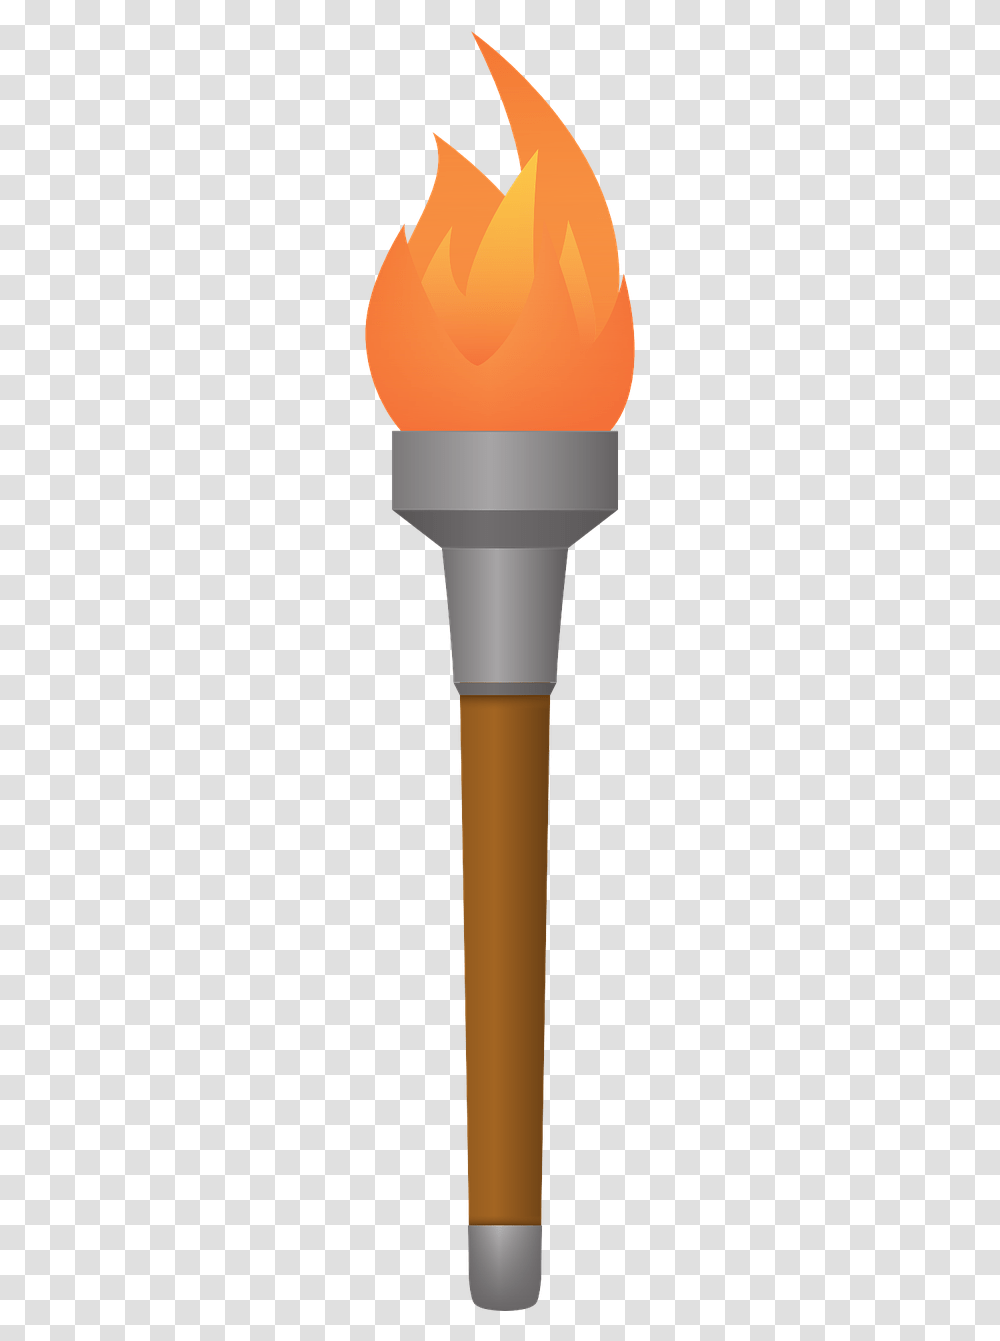 Torchlight Torch Fire Free Photo Flambeaux The Cask Of Amontillado, Brush, Tool Transparent Png